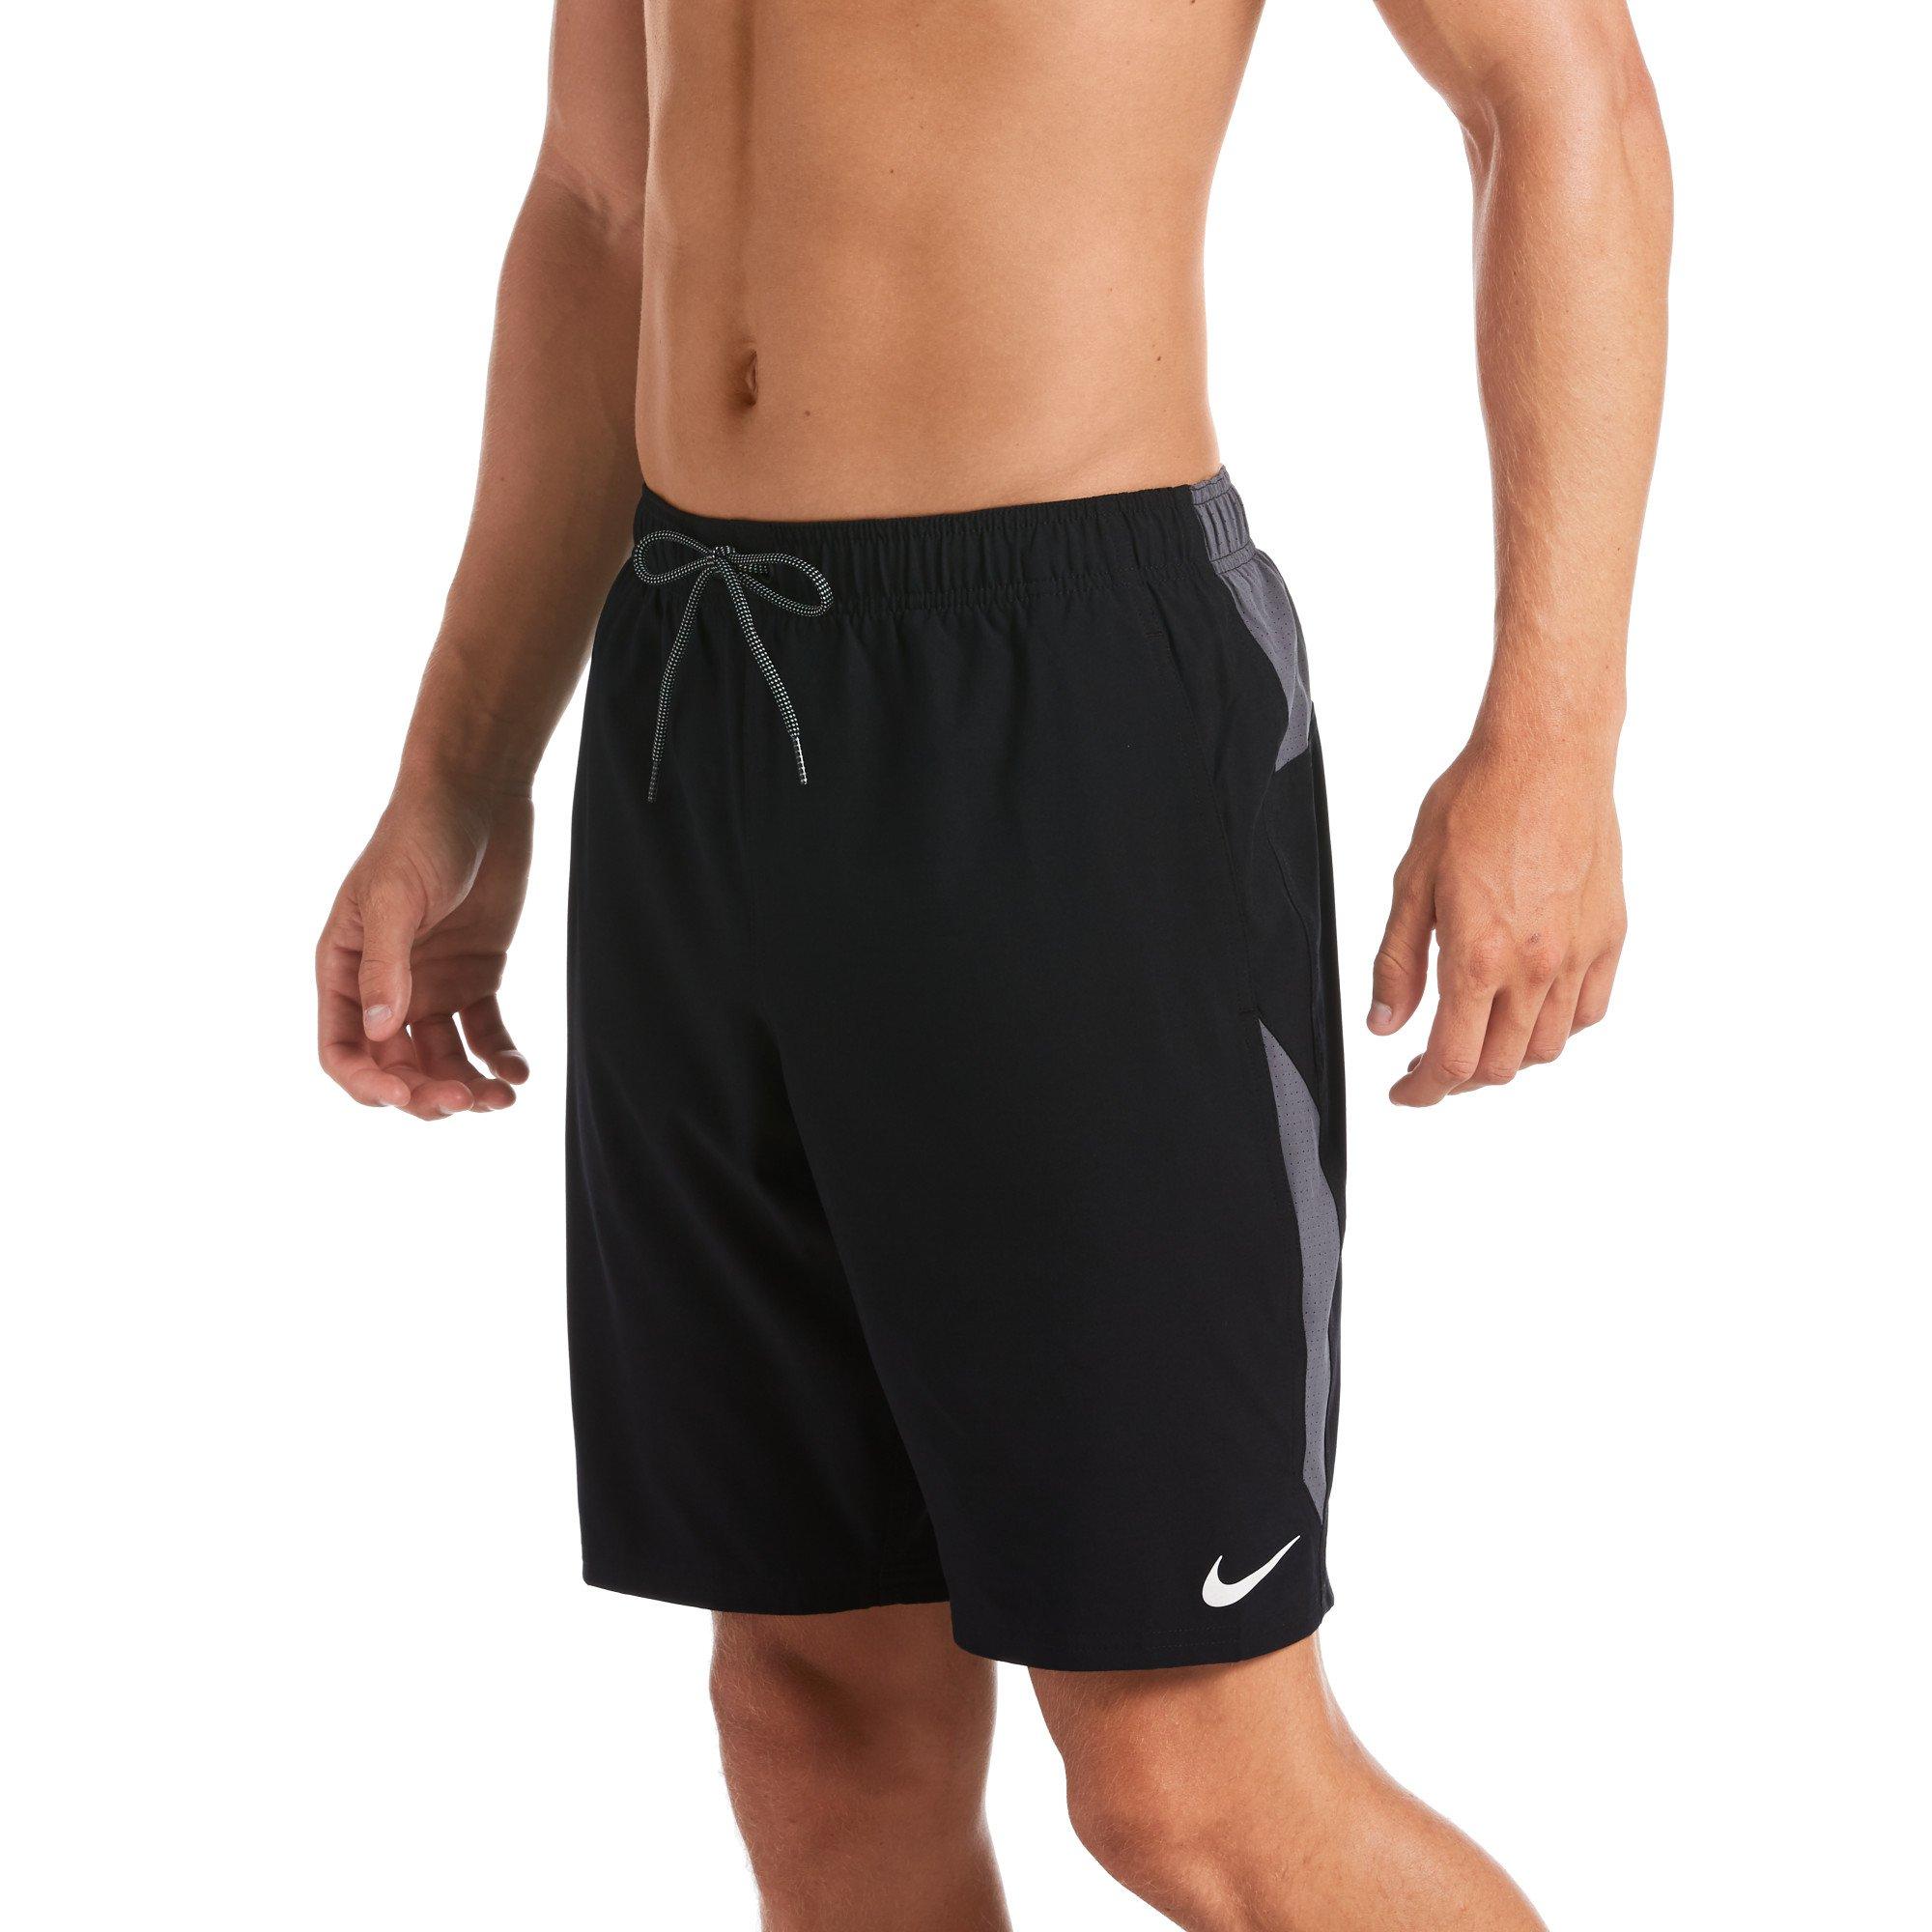 Nike Men's Contend 9" Volley